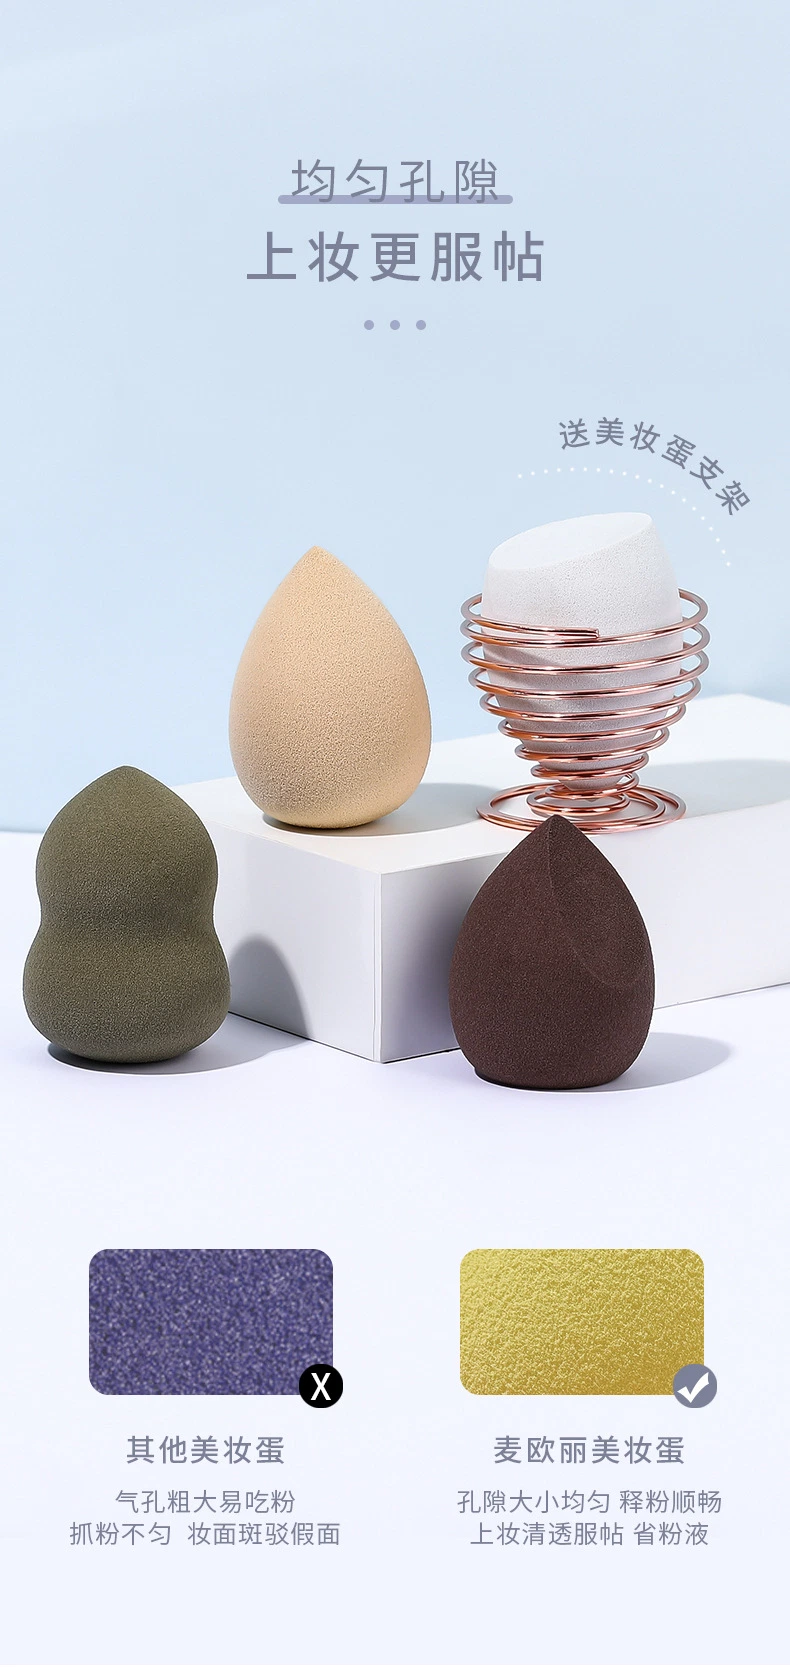 Ultra-Soft Makeup Egg 4 Packs Plus Support Set Which Will Become Large in Case of Water Dry and Wet Powder Puff